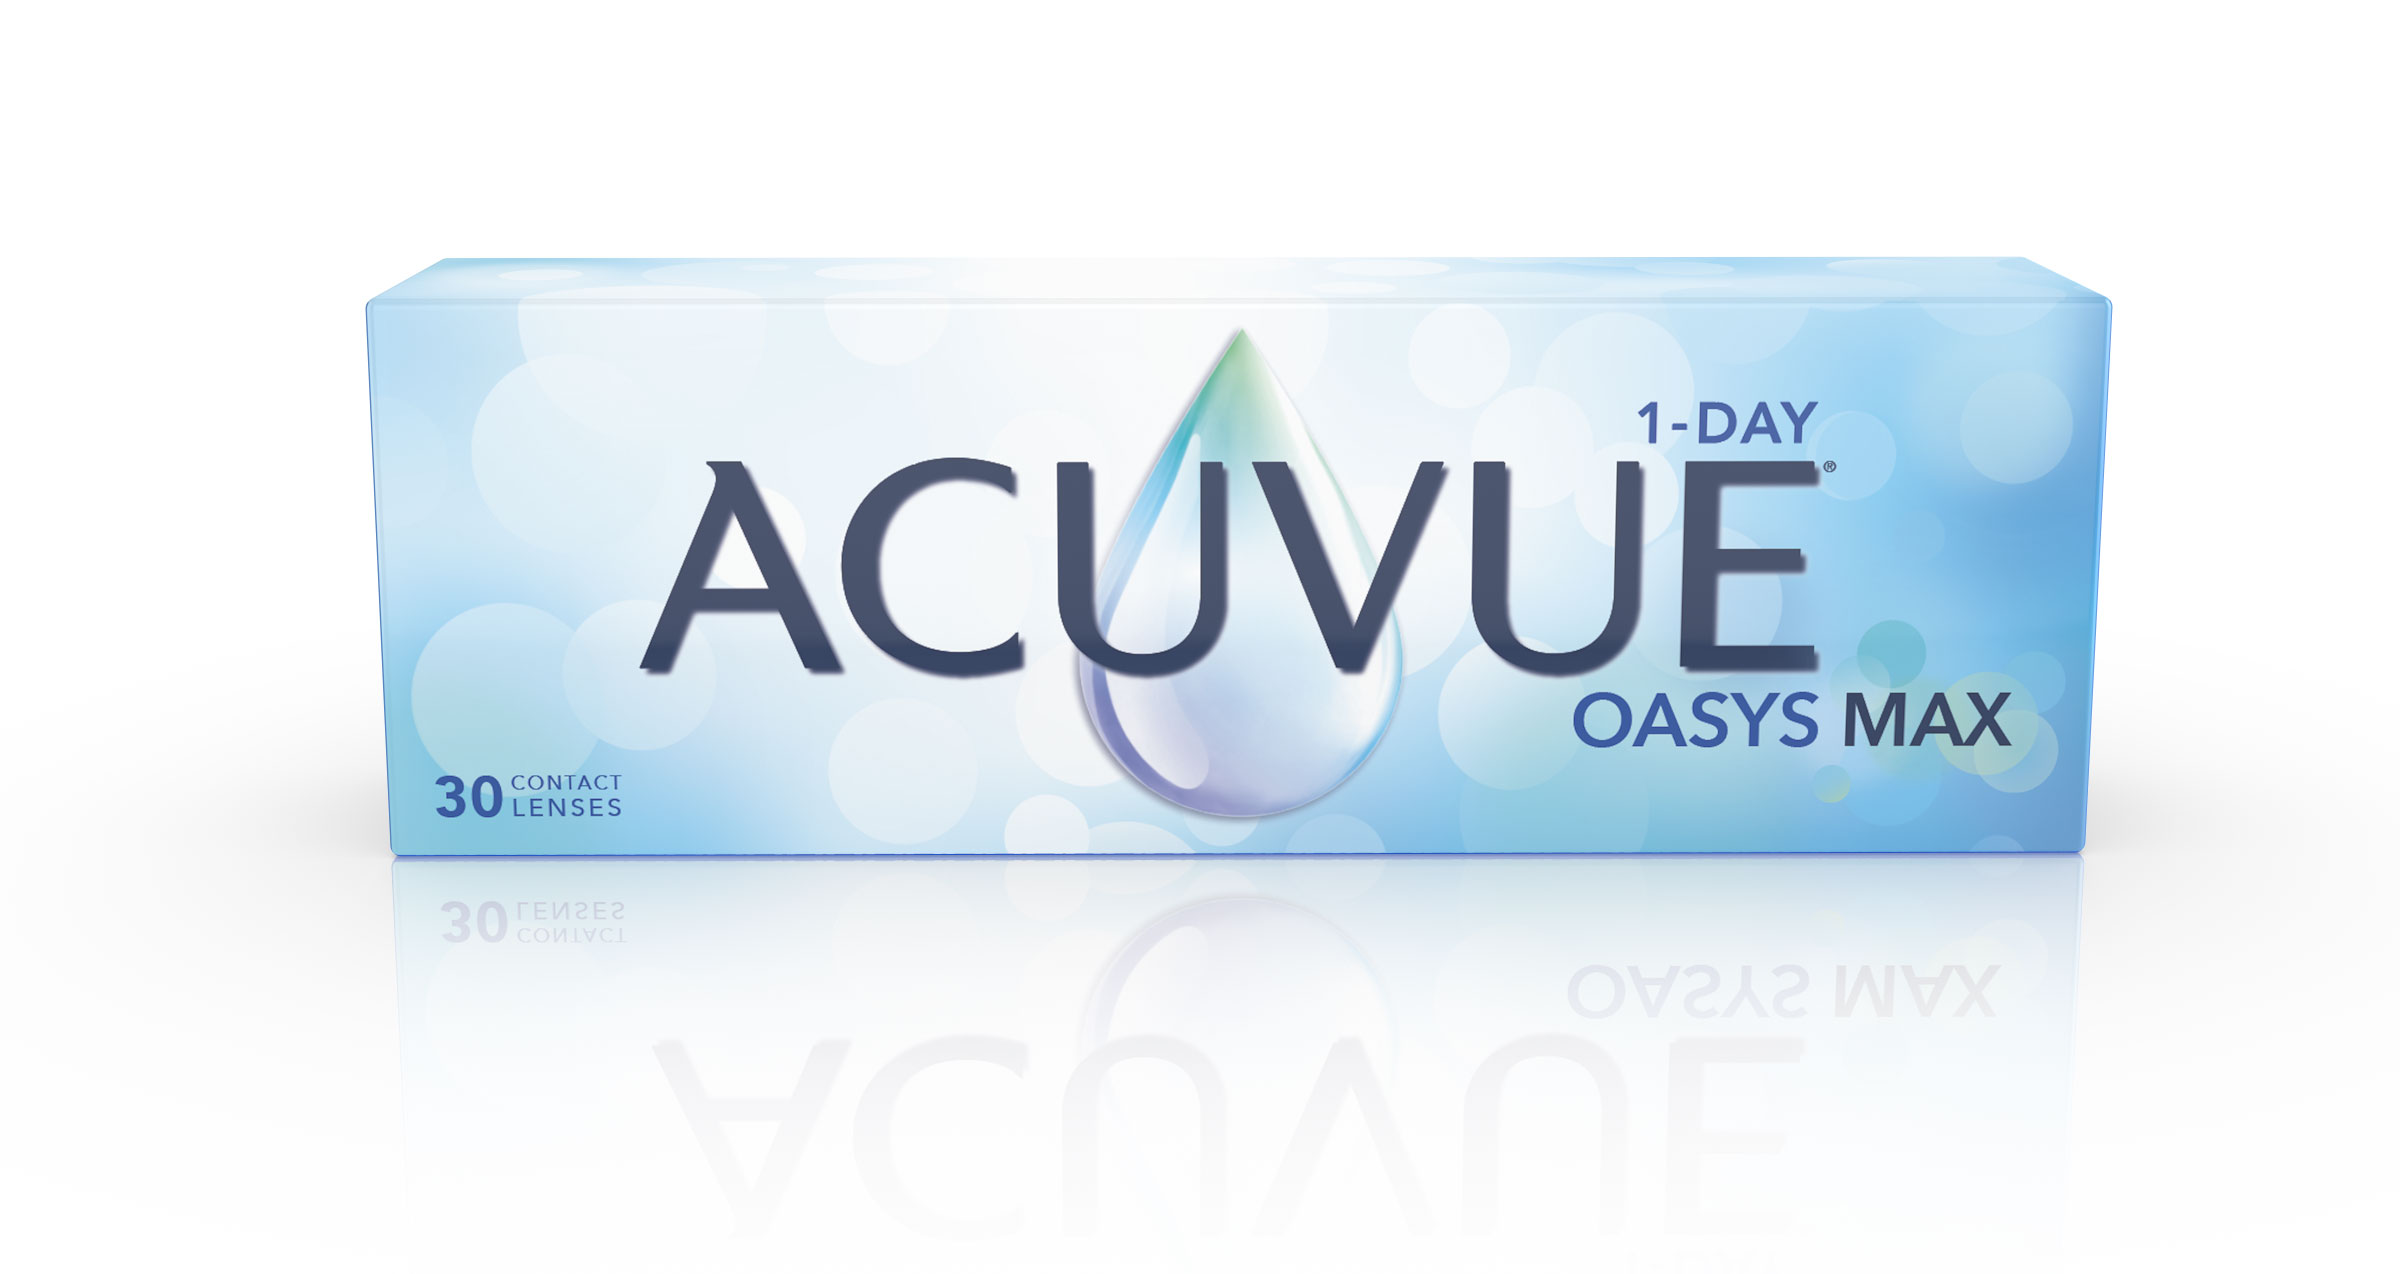 J&J 1-Day Acuvue Oasis Max